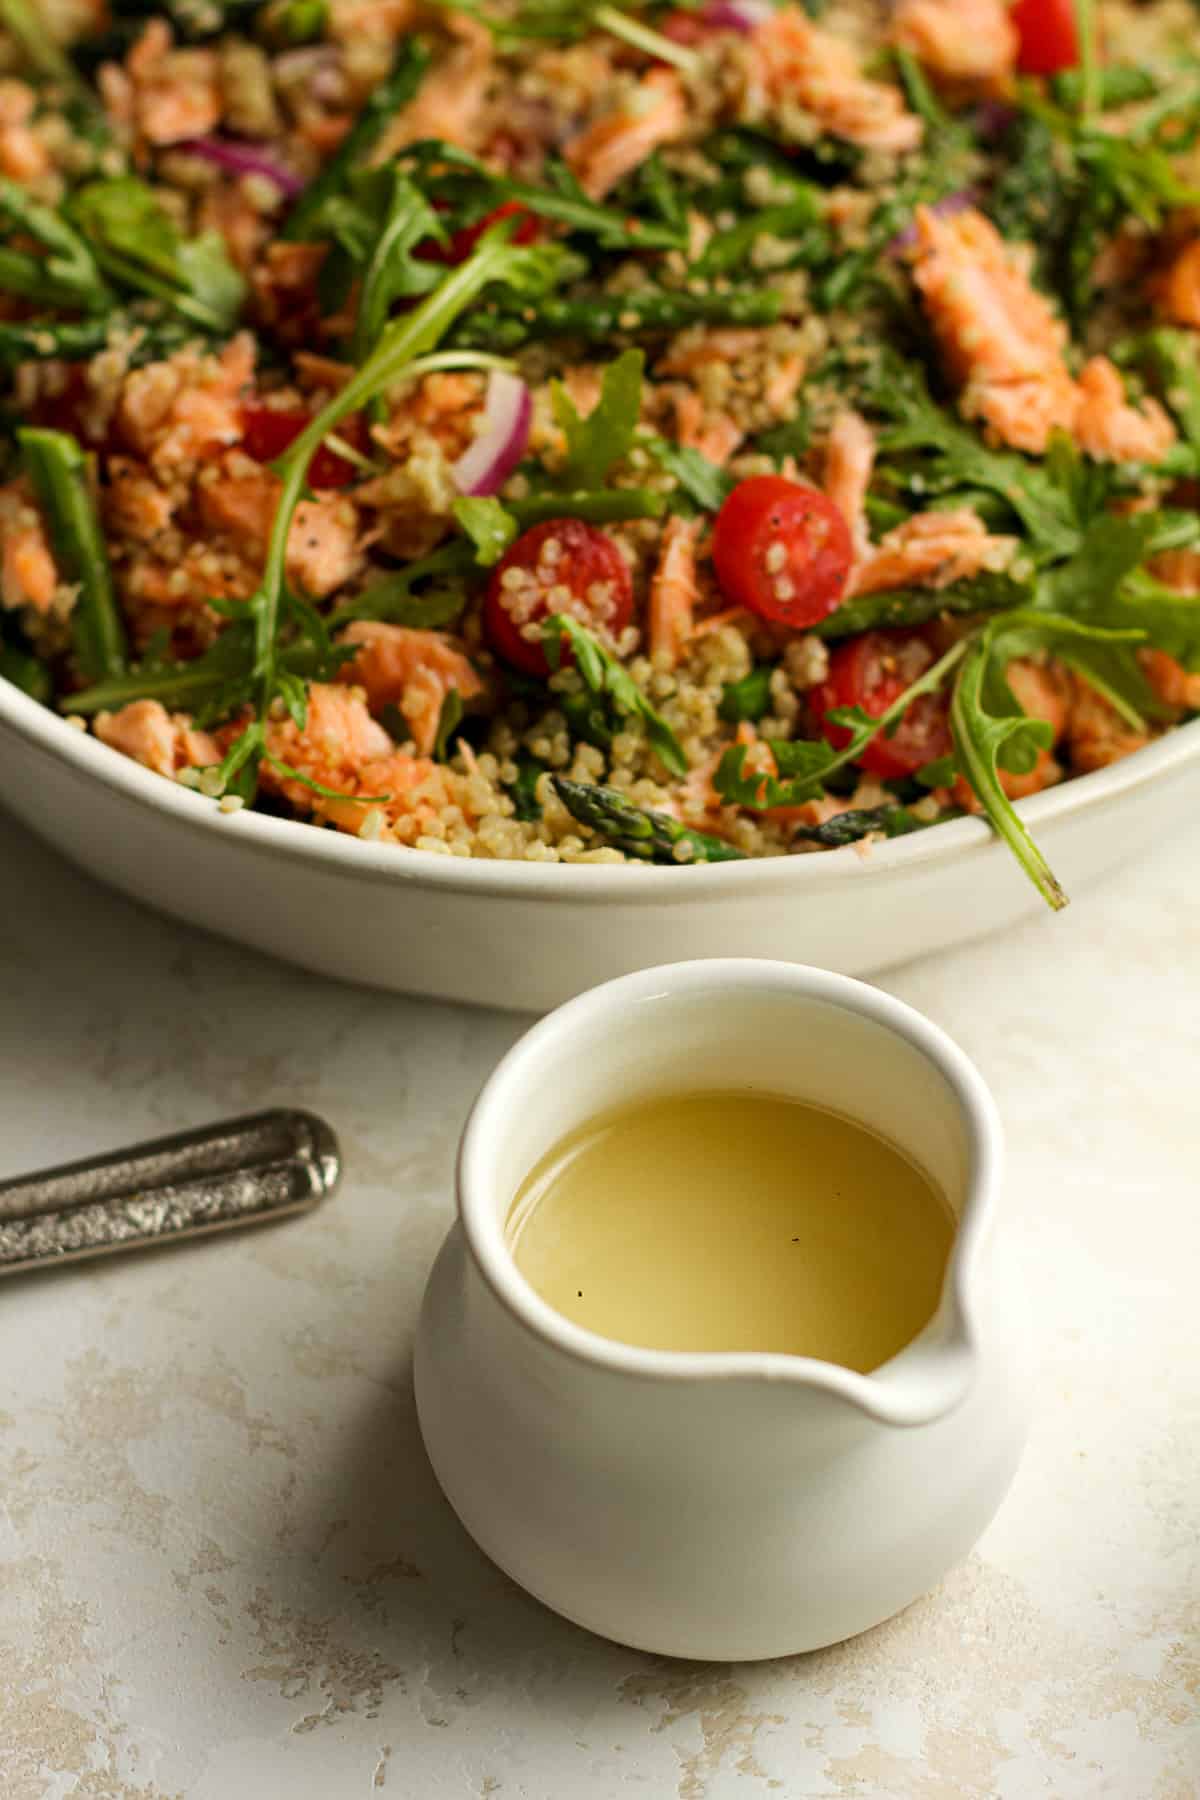 The lemon dressing in front of the salmon quinoa salad.